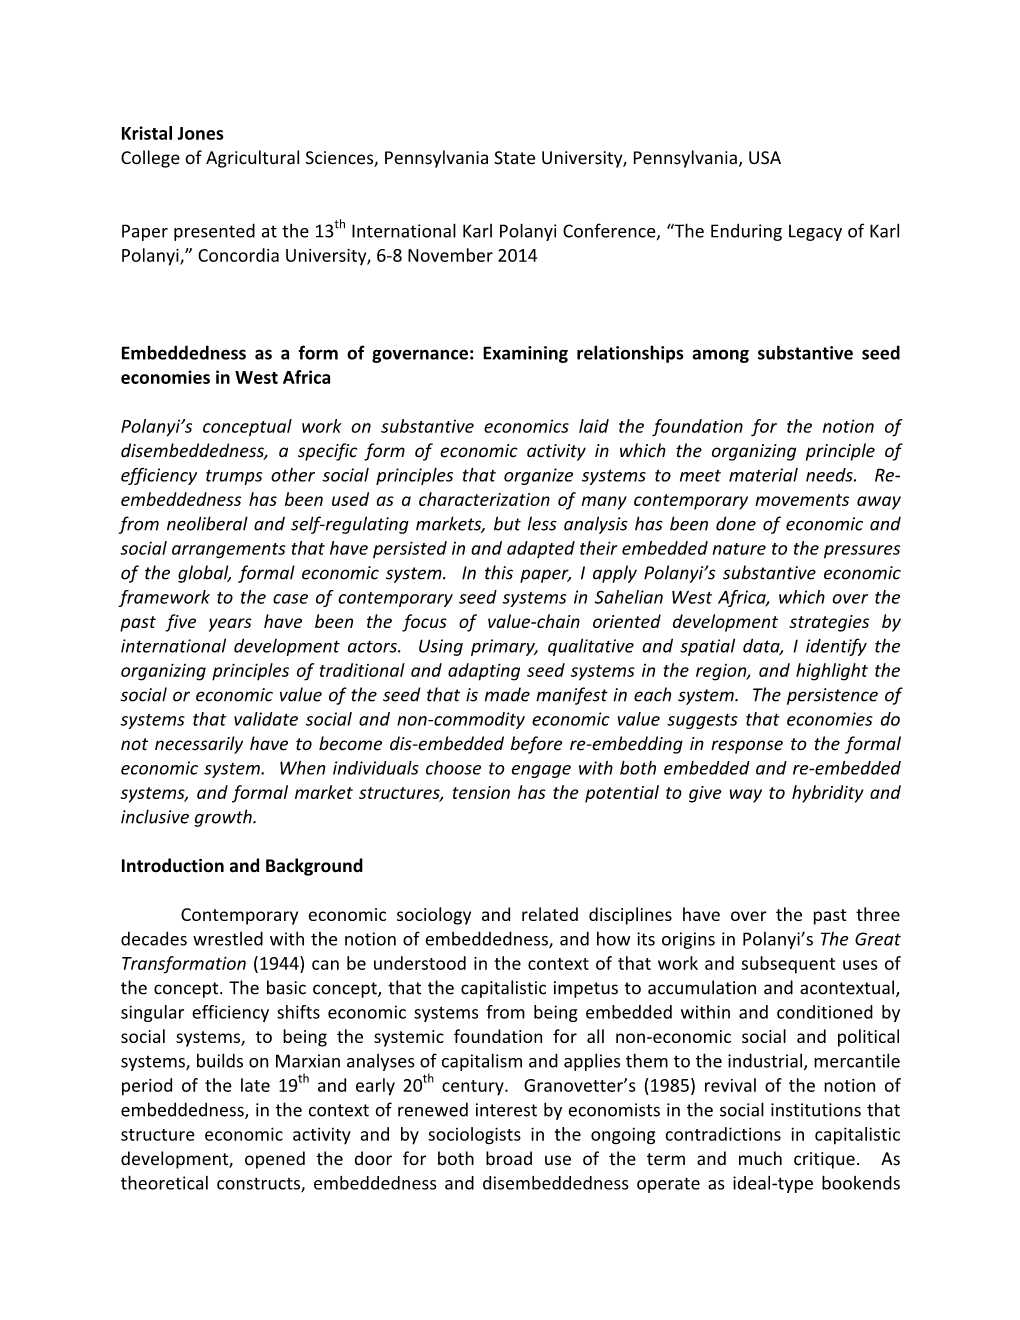 Embeddedness As a Form of Governance: Examining Relationships Among Substantive Seed Economies in West Africa